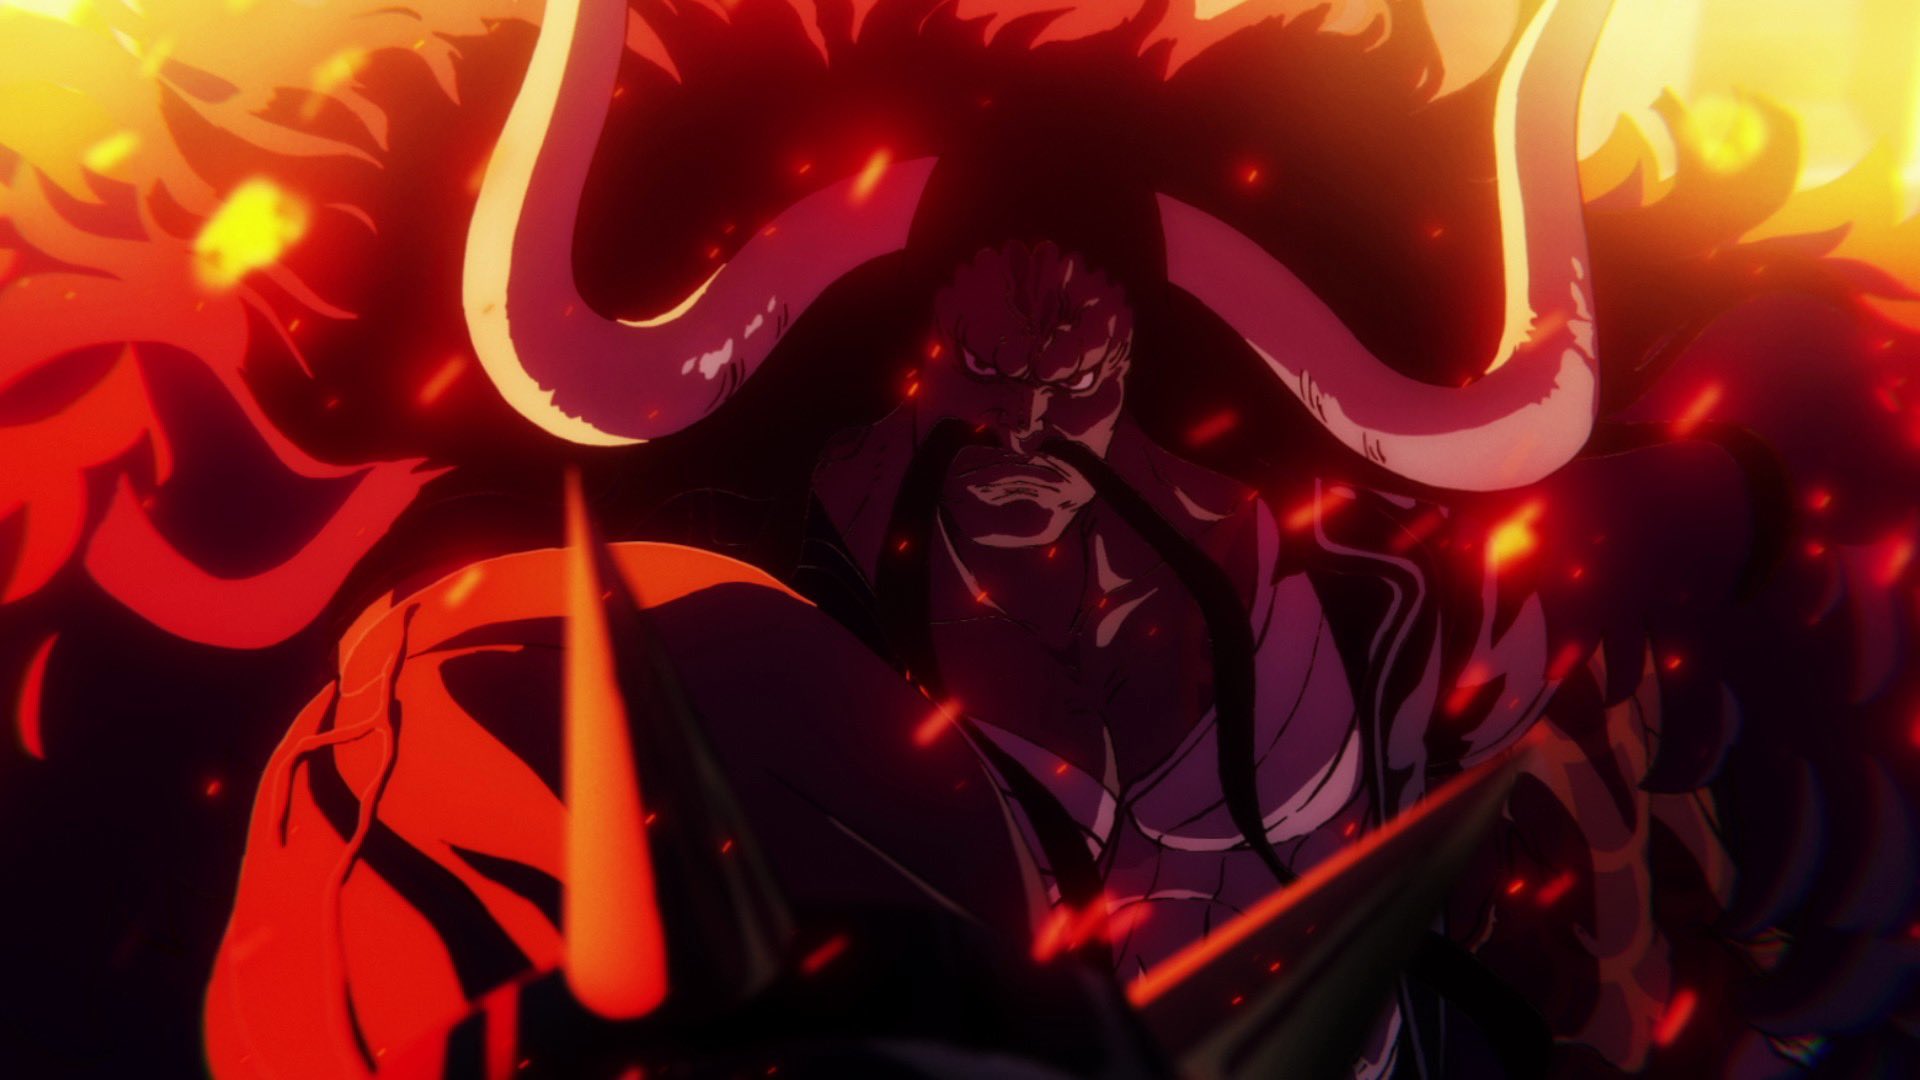 Anime Corner on X: NEWS: ONE PIECE - Opening 25 Teaser Video and Images!  Watch:  The new opening will premiere in episode  1074 tomorrow, featuring the theme song Highest Point by